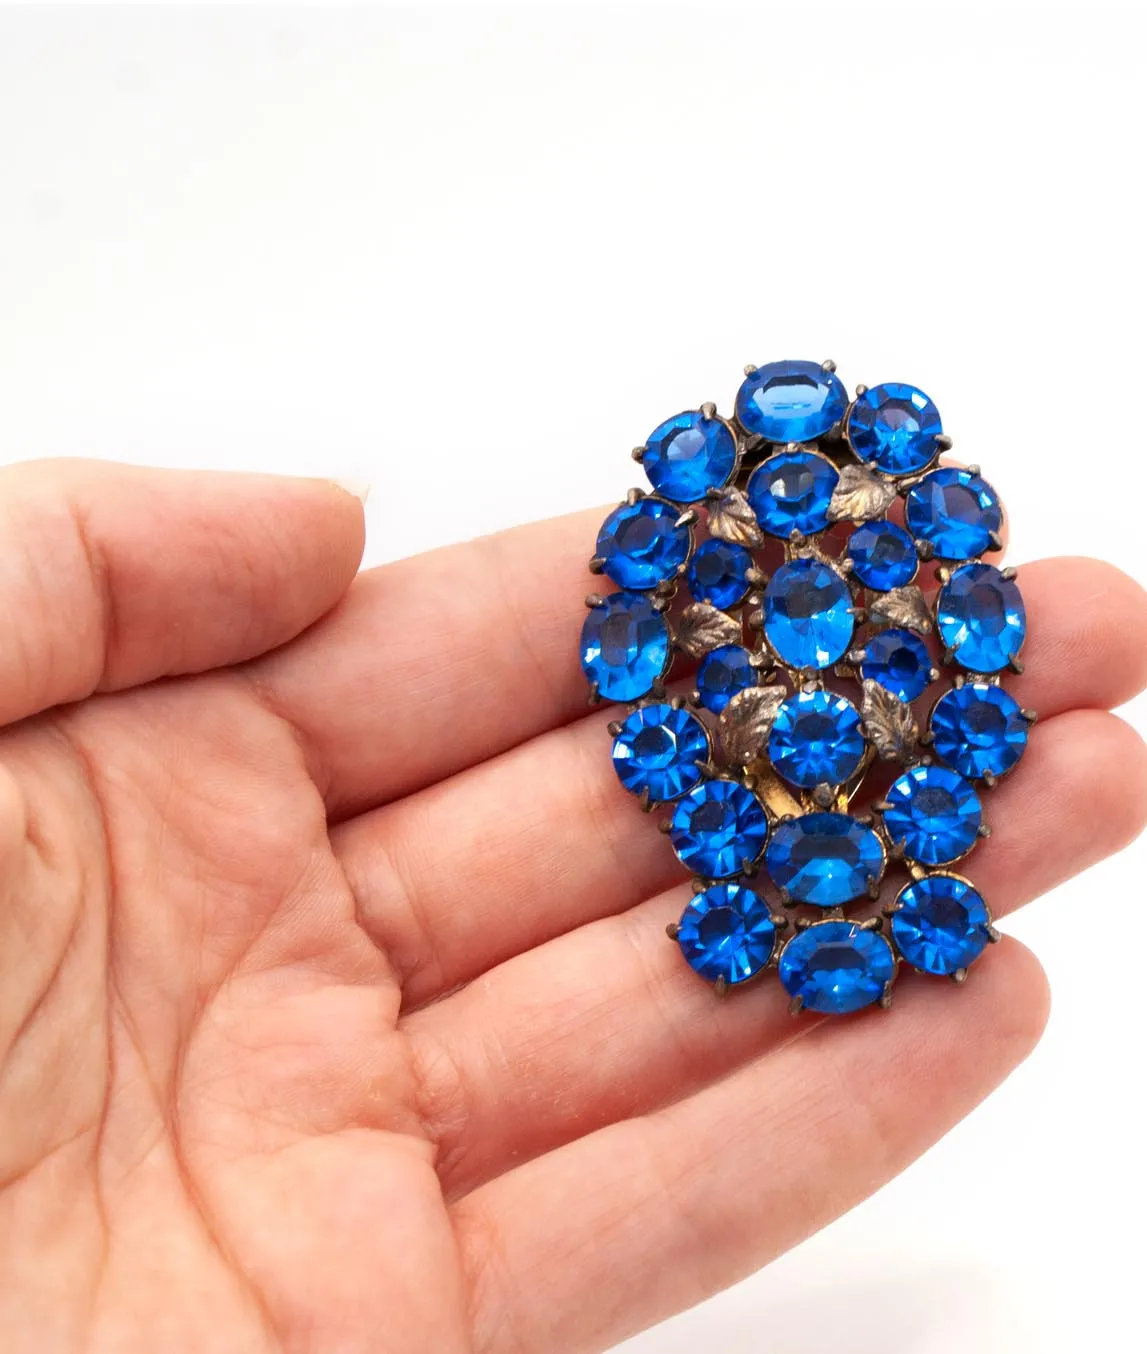 Large blue crystal dress clip held in a hand